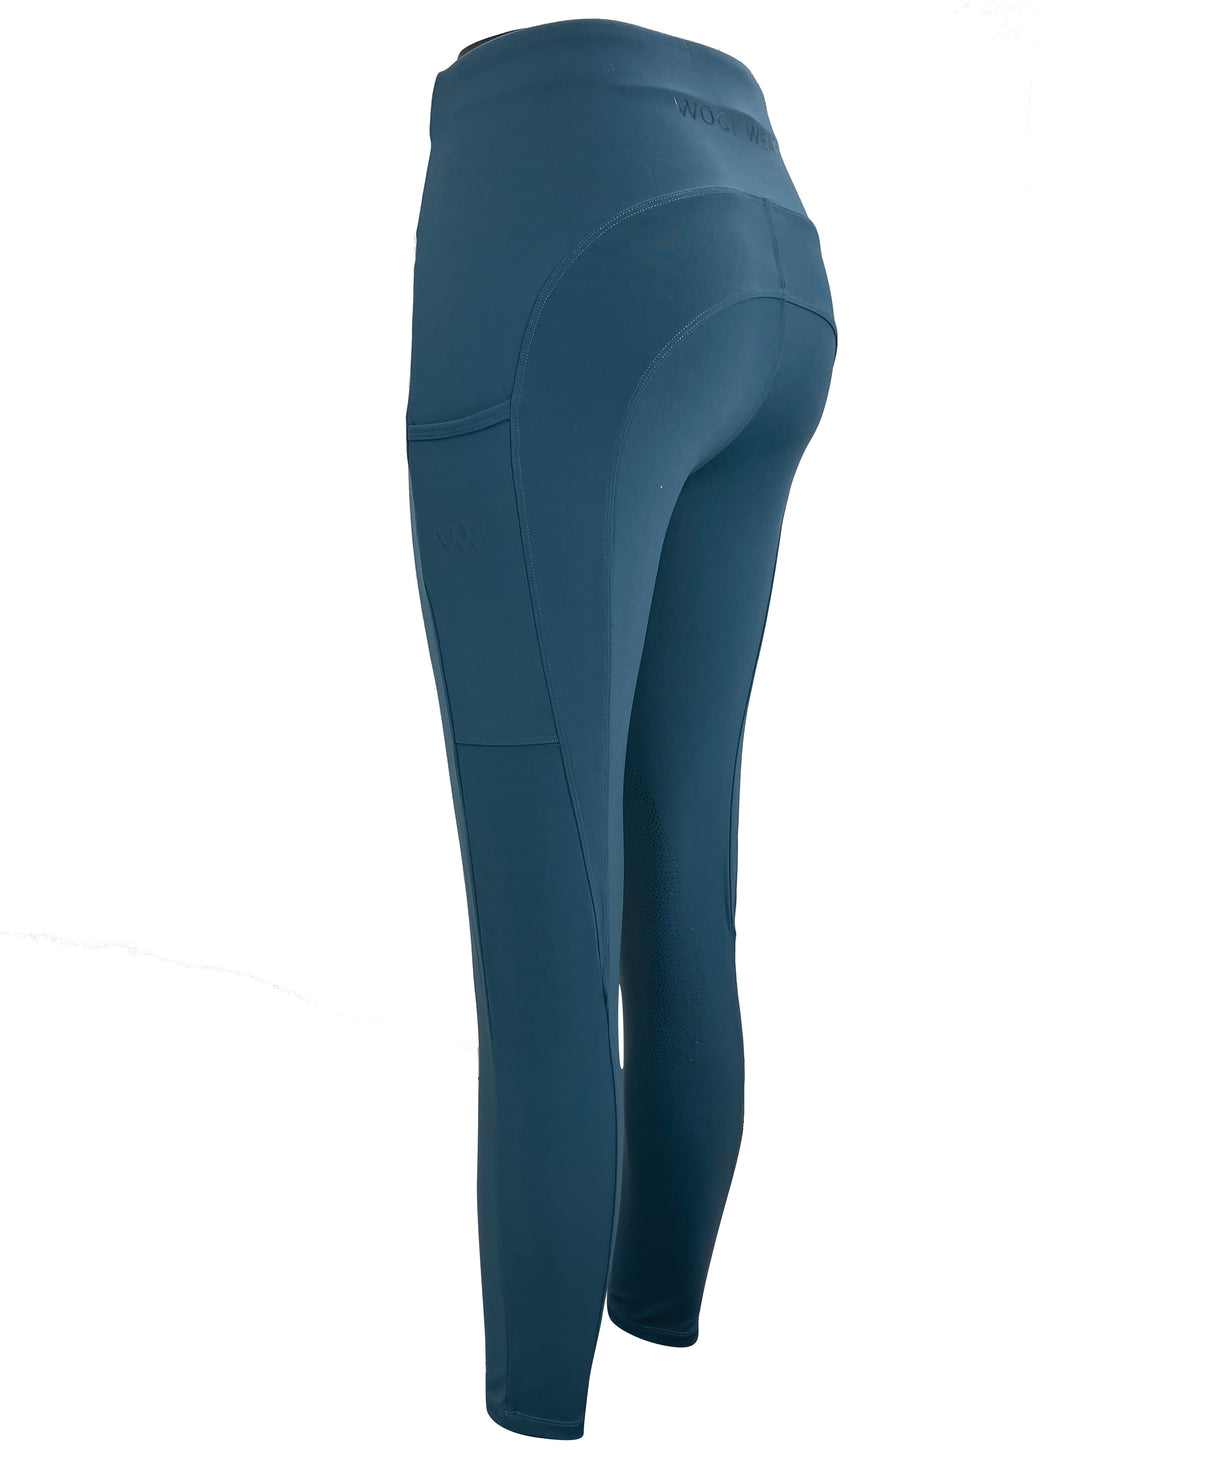 Woof Wear Ladies Knee Patch Riding Tights #colour_petrol-blue